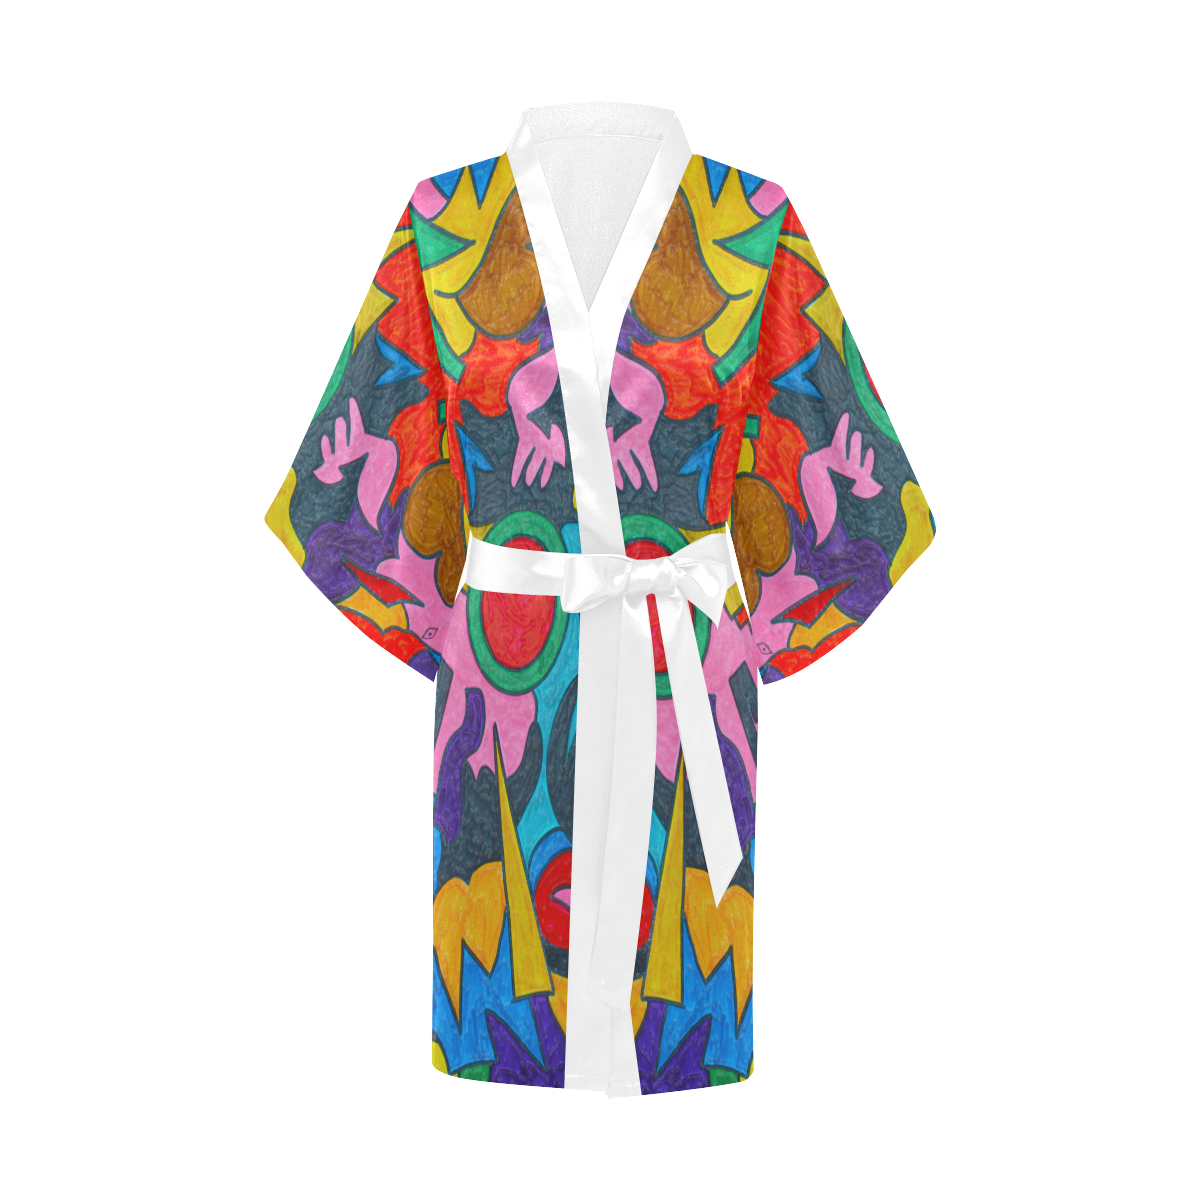 DEMONS FROM HELL IN PLASTIC Kimono Robe